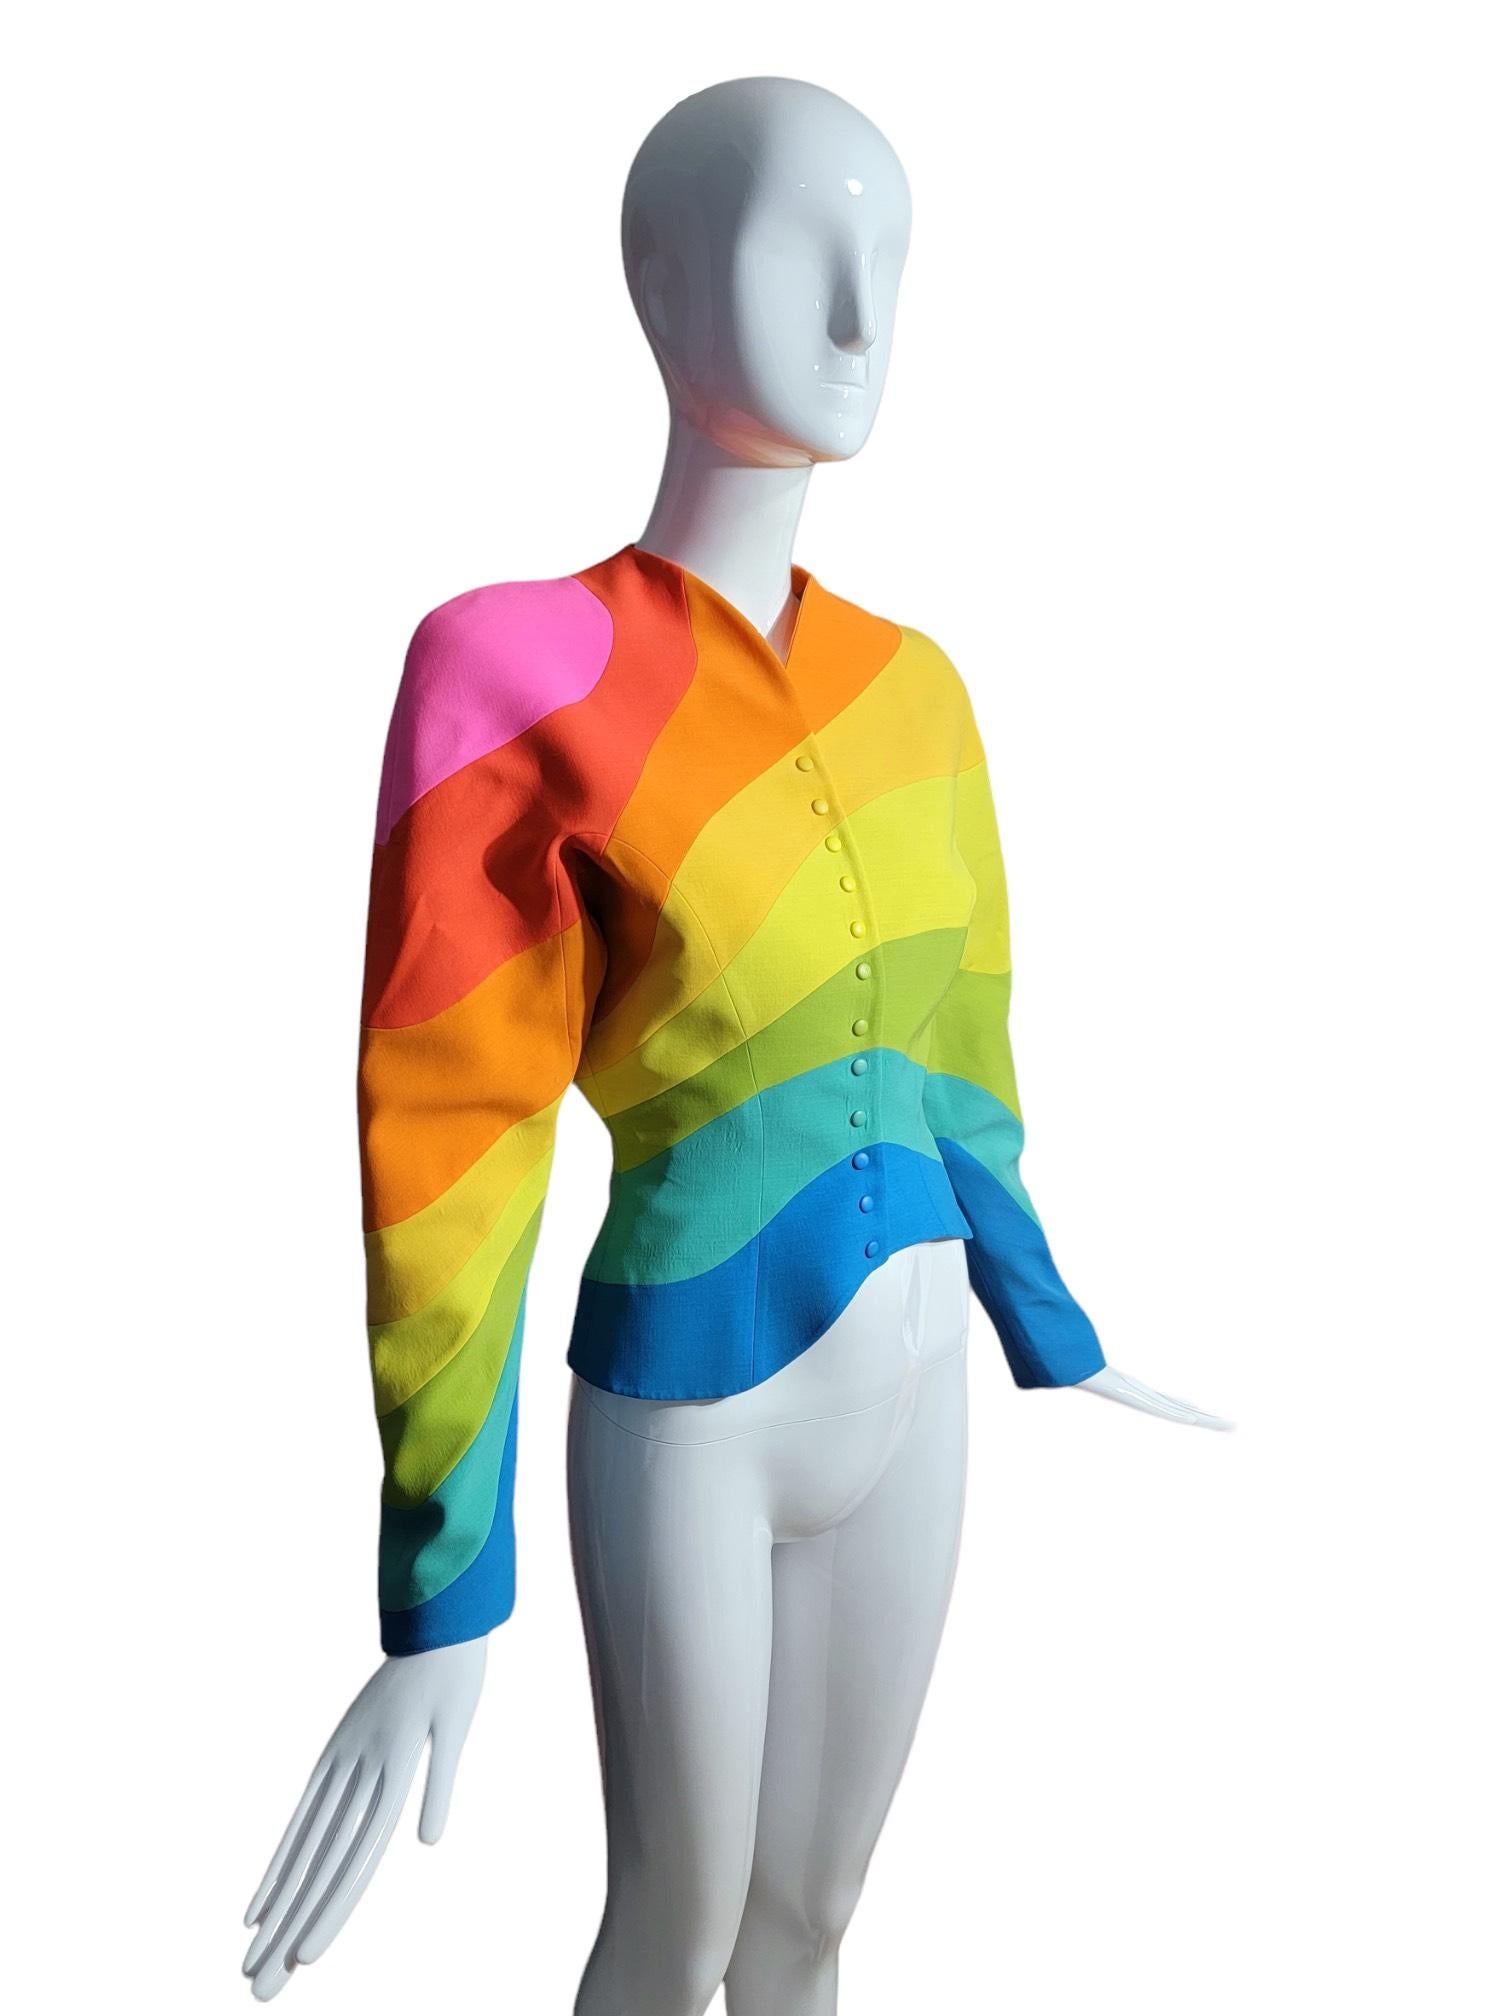 S/S 1990 Thierry Mugler Iconic Rainbow Structured Runway Jacket  In Excellent Condition For Sale In Concord, NC